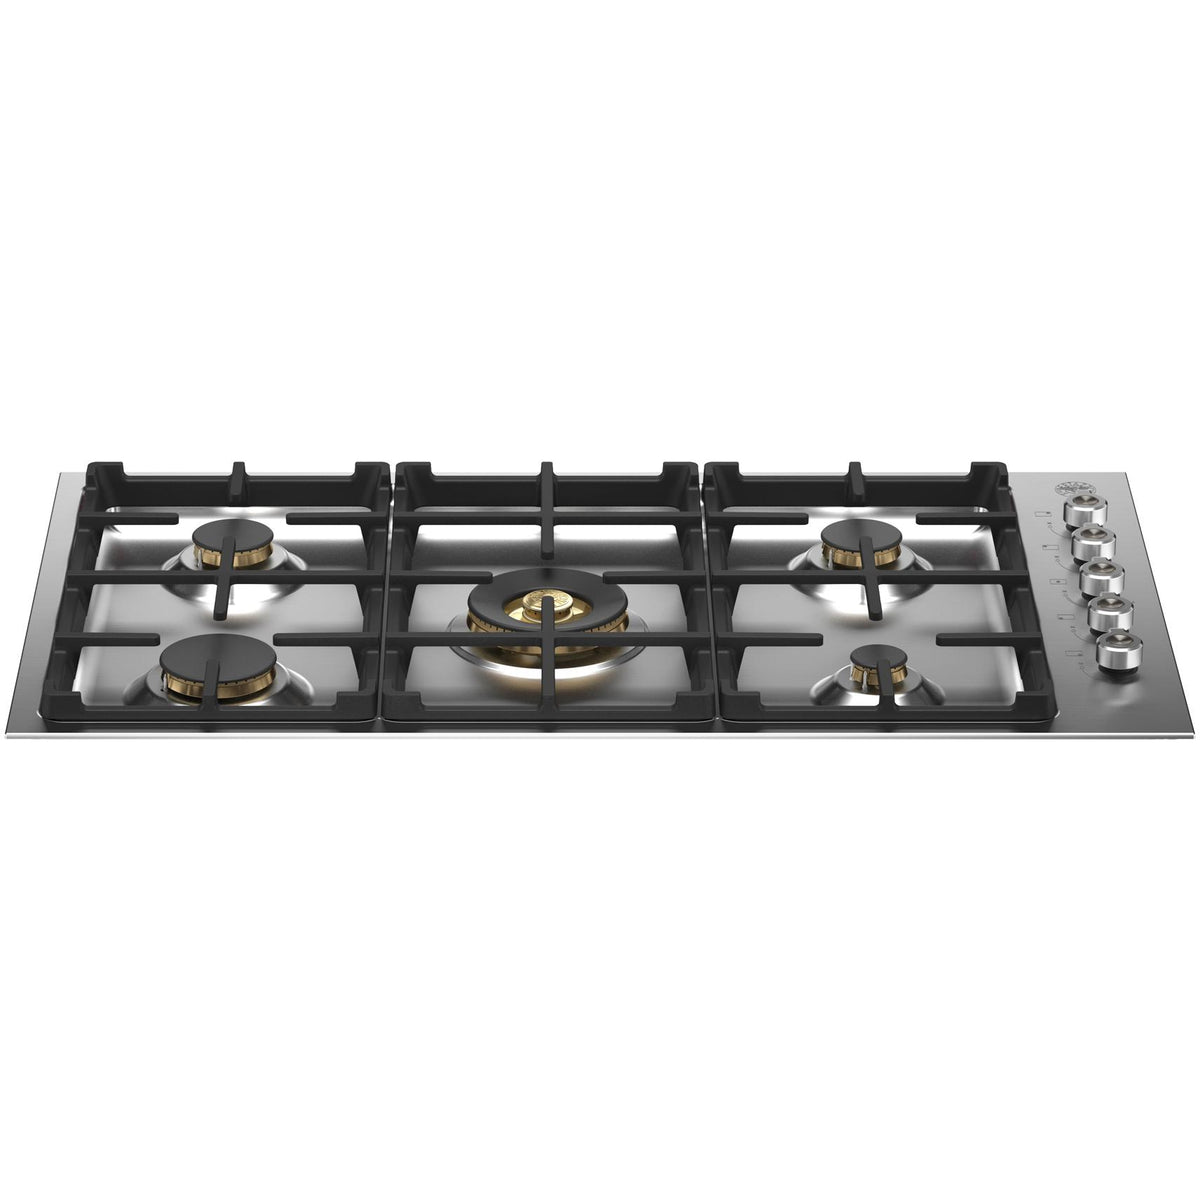 Bertazzoni 36-inch Built-In Gas Cooktop PROF365QBXT IMAGE 1